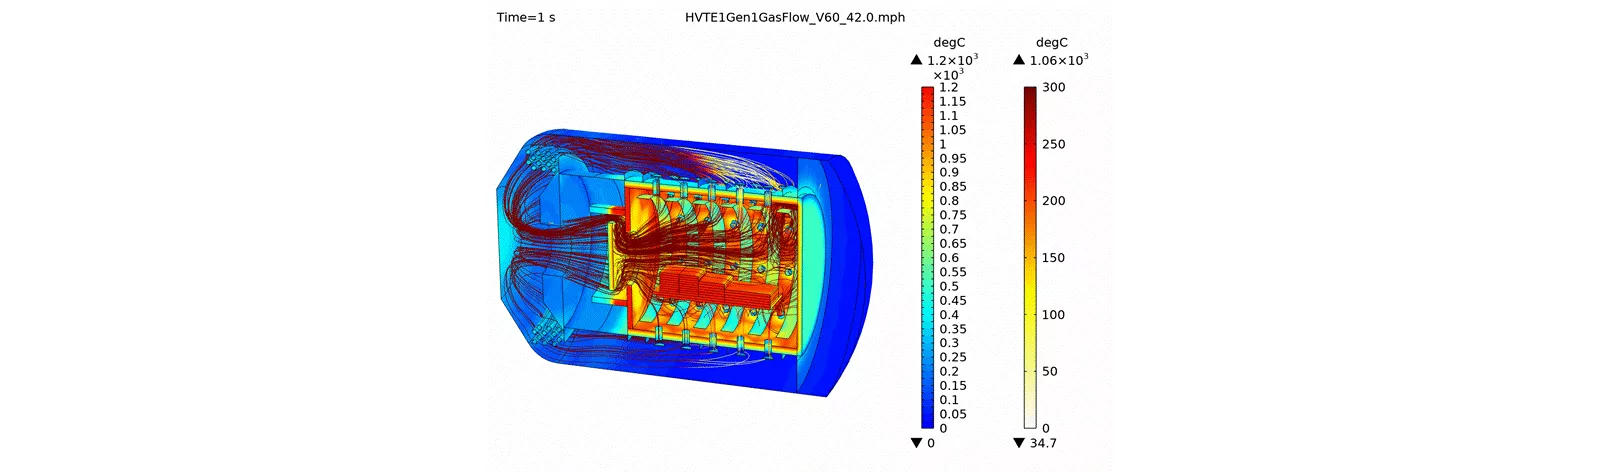 Hot zone gas flow simulation